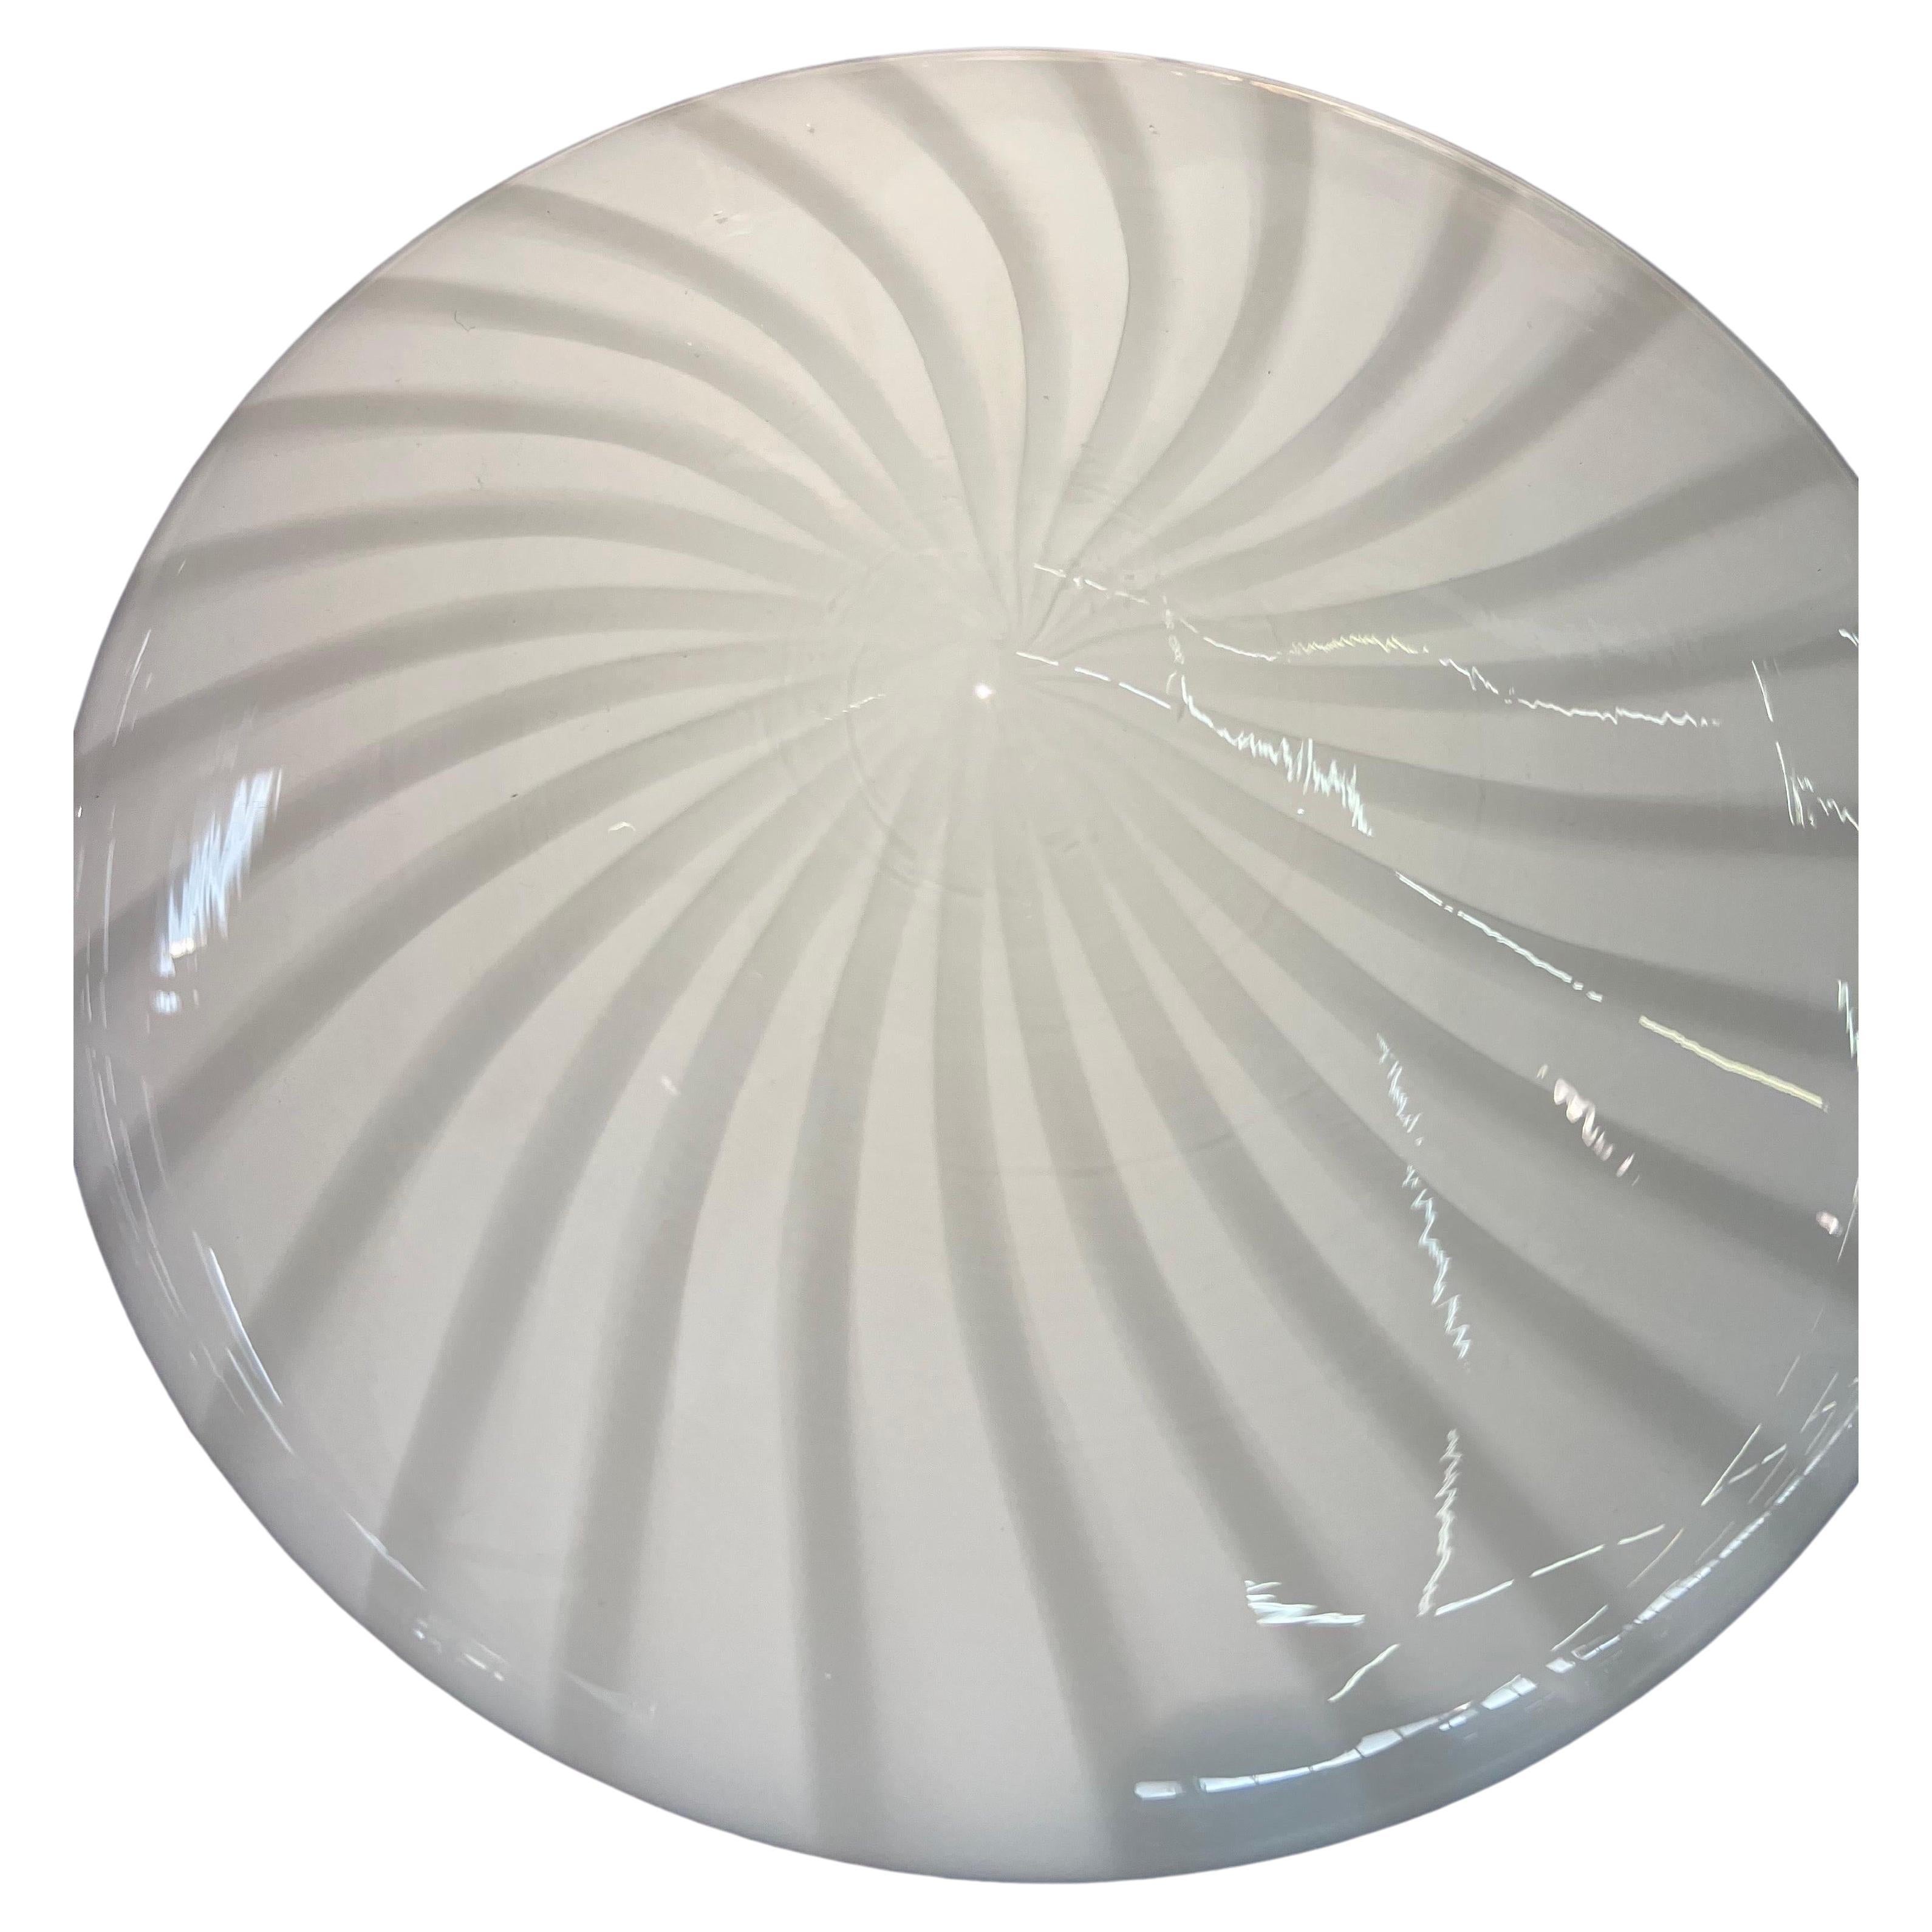 Vintage Murano swirl pattern glass flush or wall mounts. 4 available at time of listing.